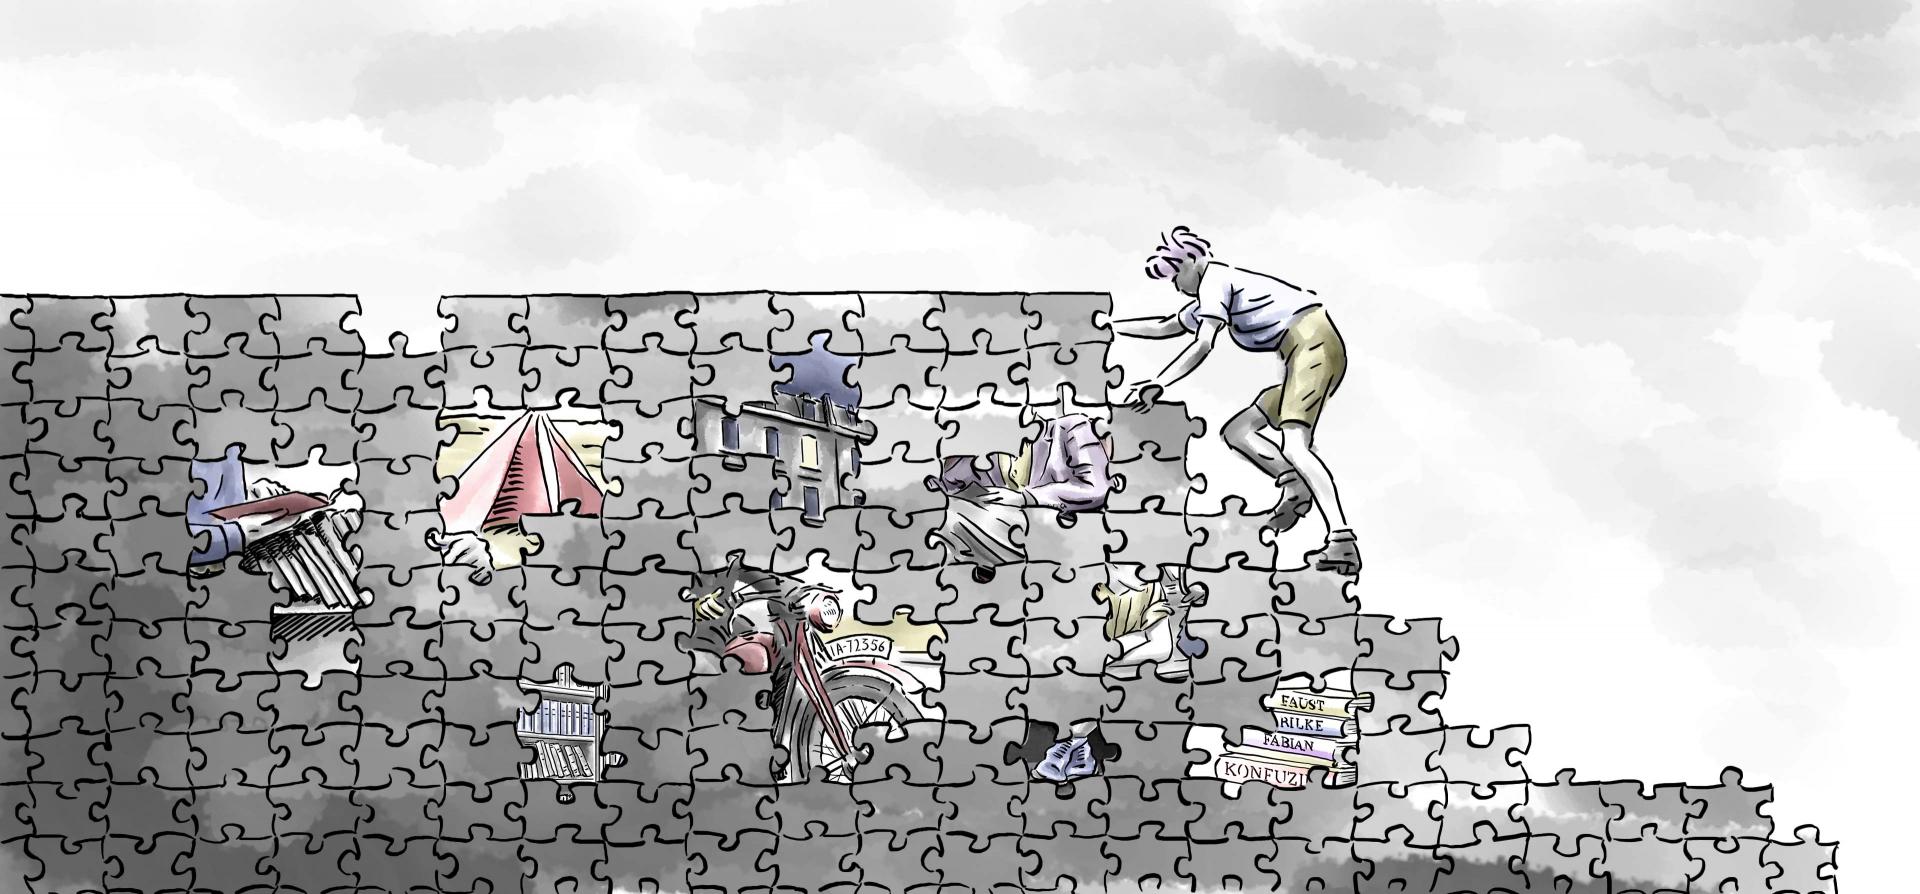 The illustration shows a young man climbing a wall made of puzzle pieces.